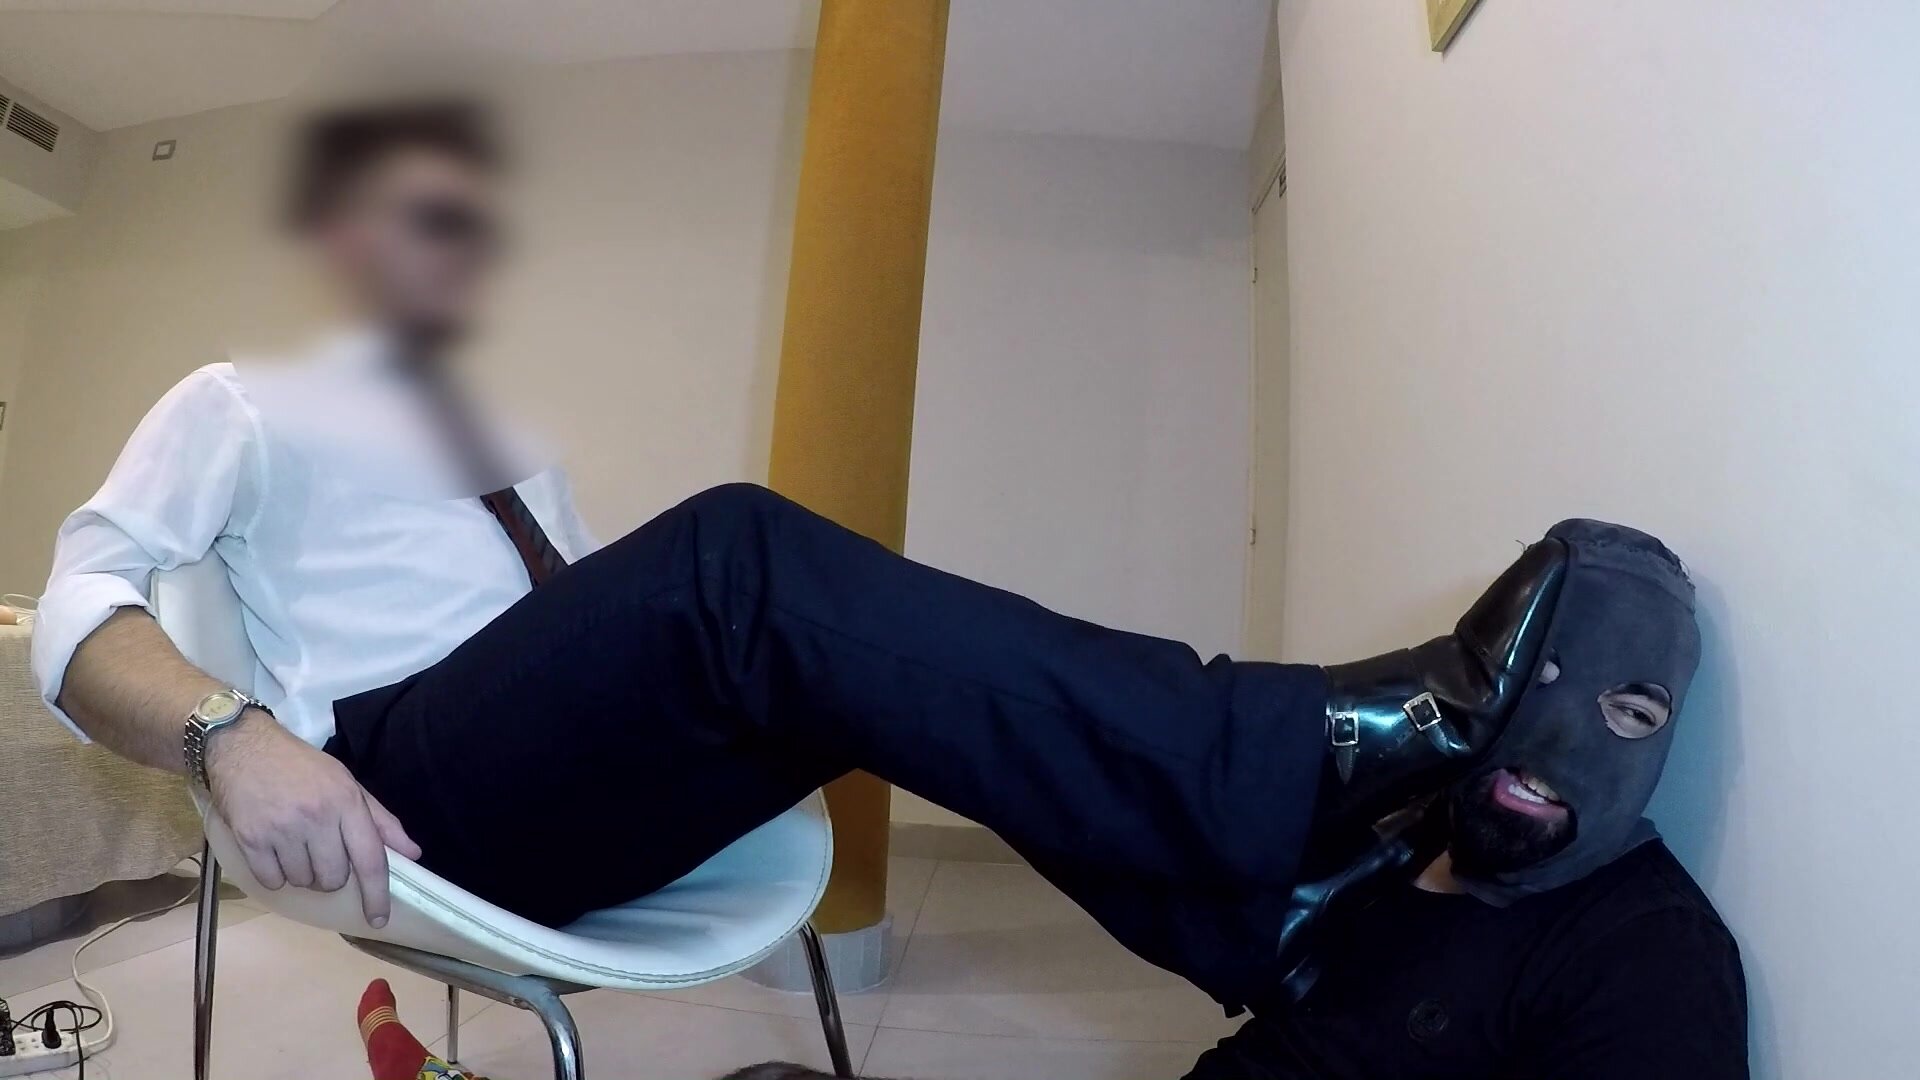 SLAVE CRUSHED OVER THE WALL WITH DRESS SHOES LIKE A BUG